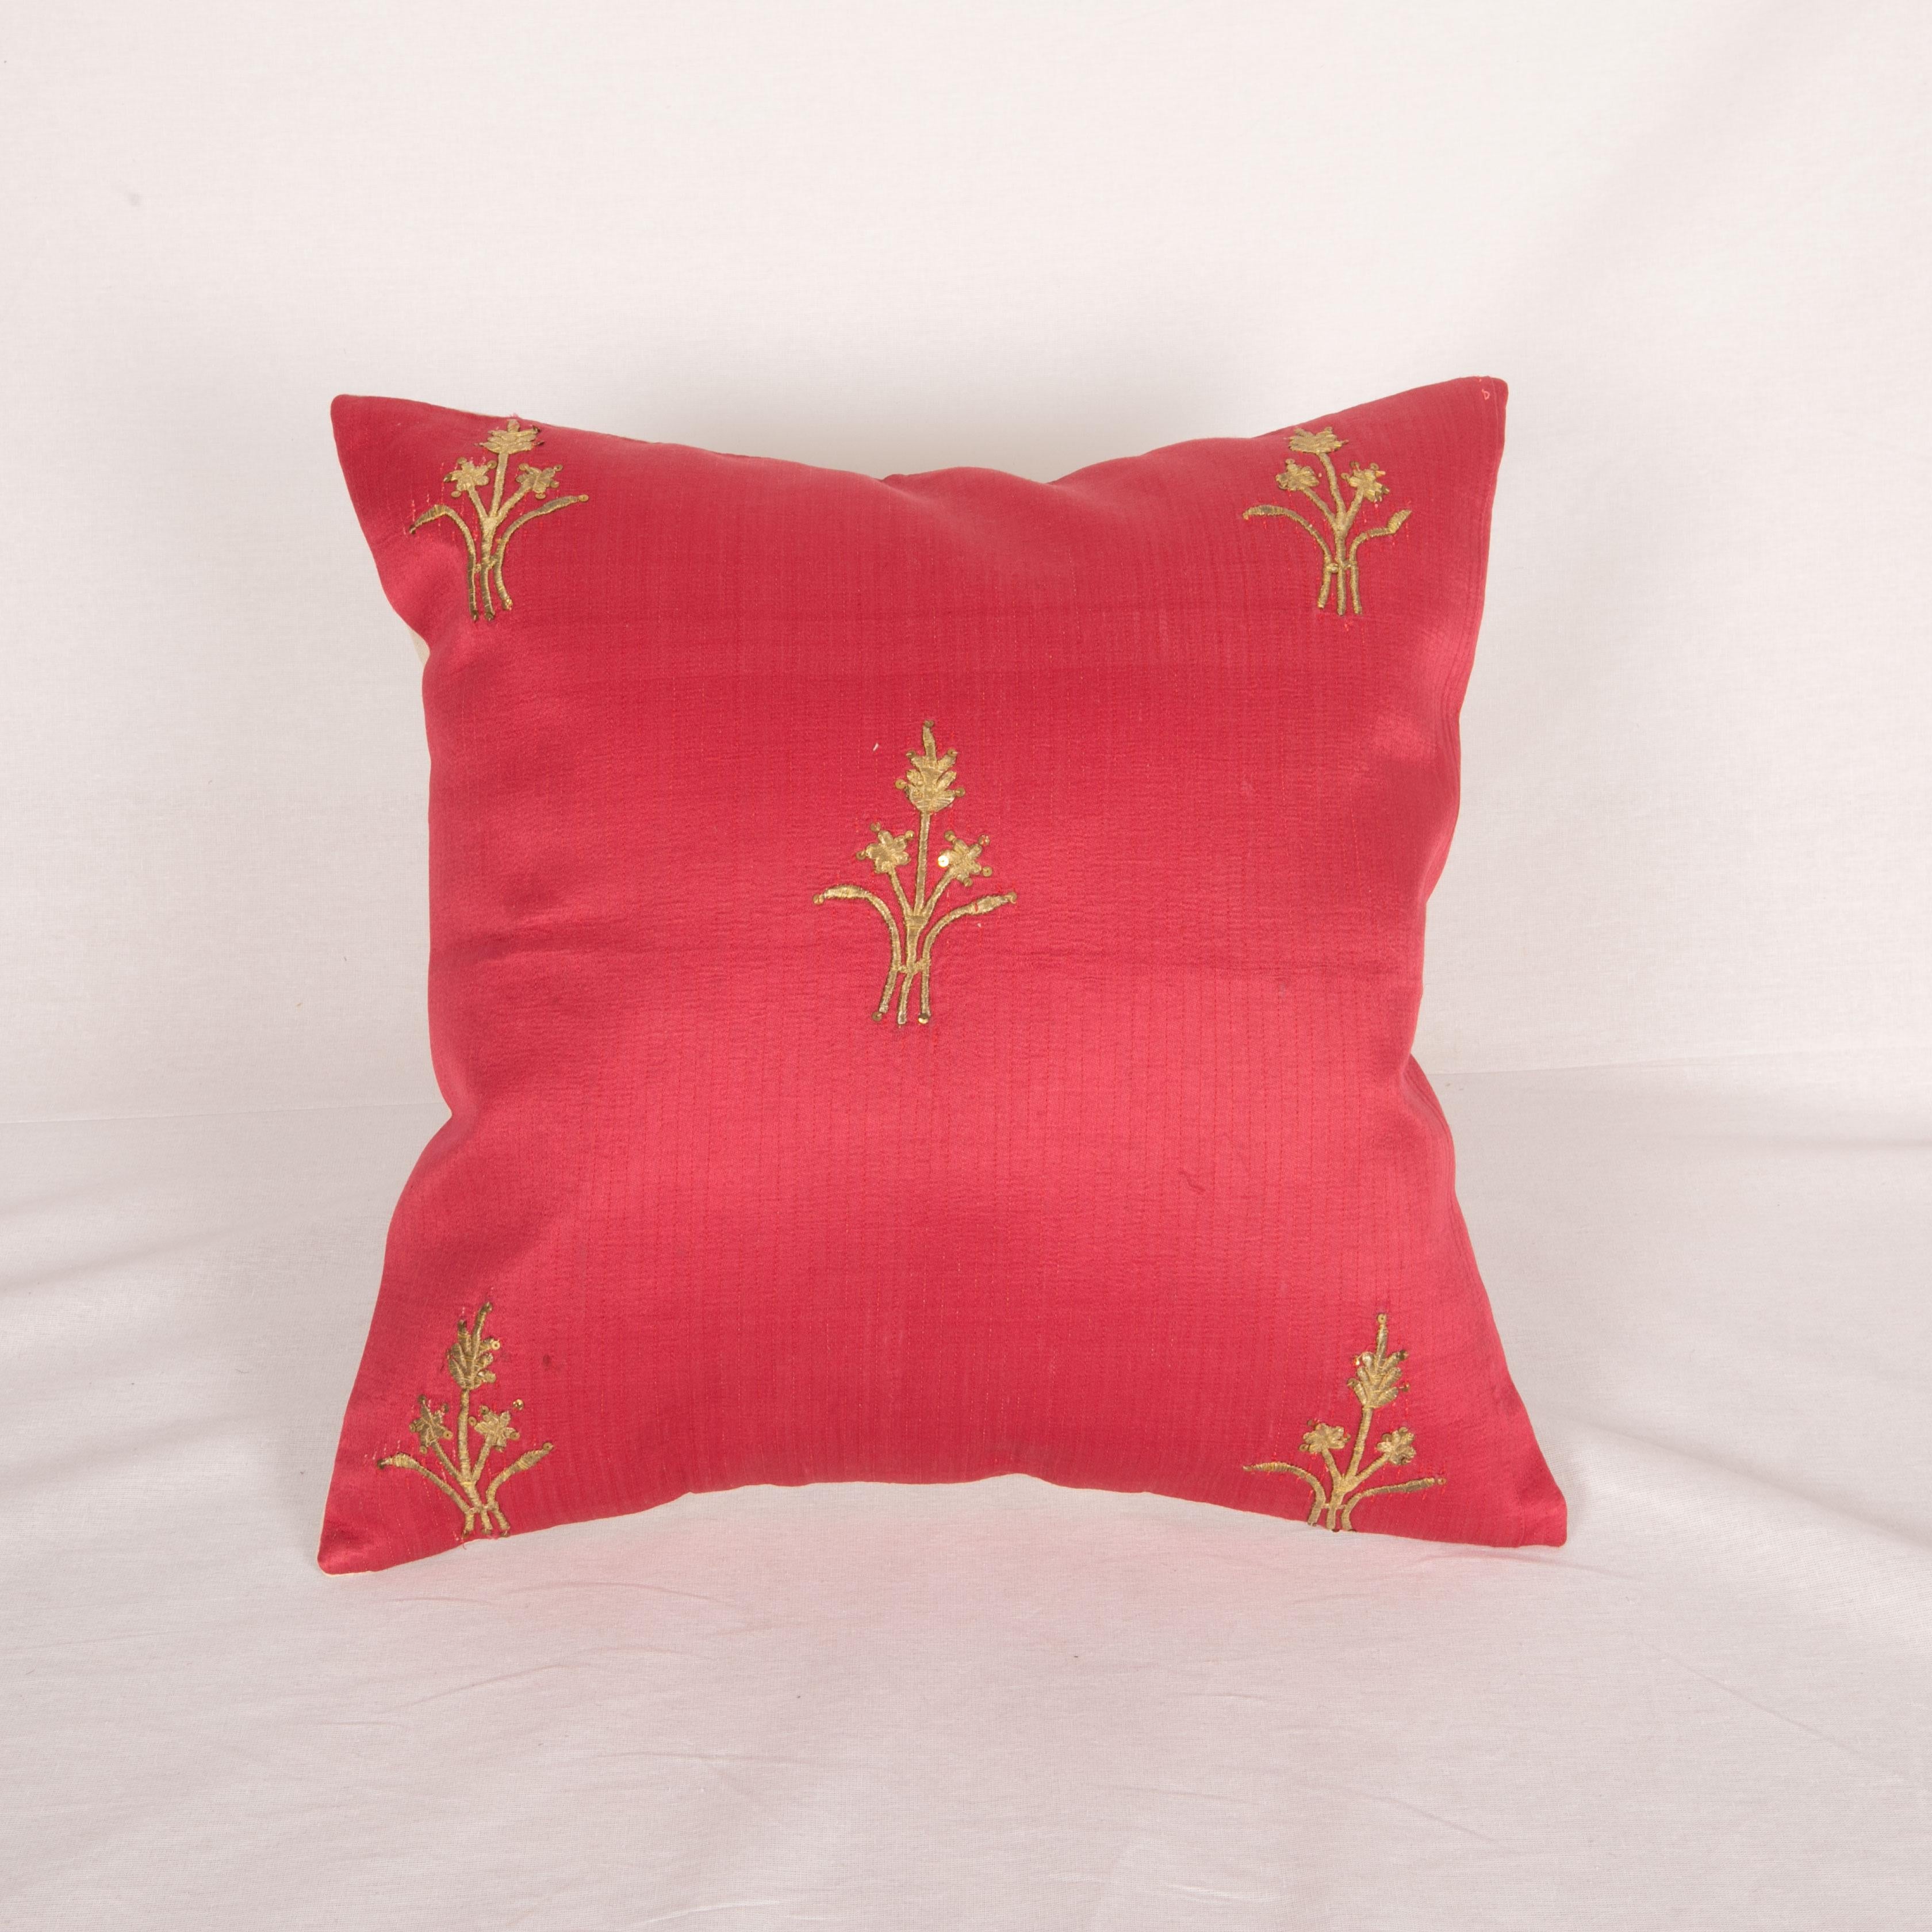 Pillow was made from an ottoman dress fragment.
It does not come with an insert .
Linen in the back.
Zipper closure
Dry clean is recommended.